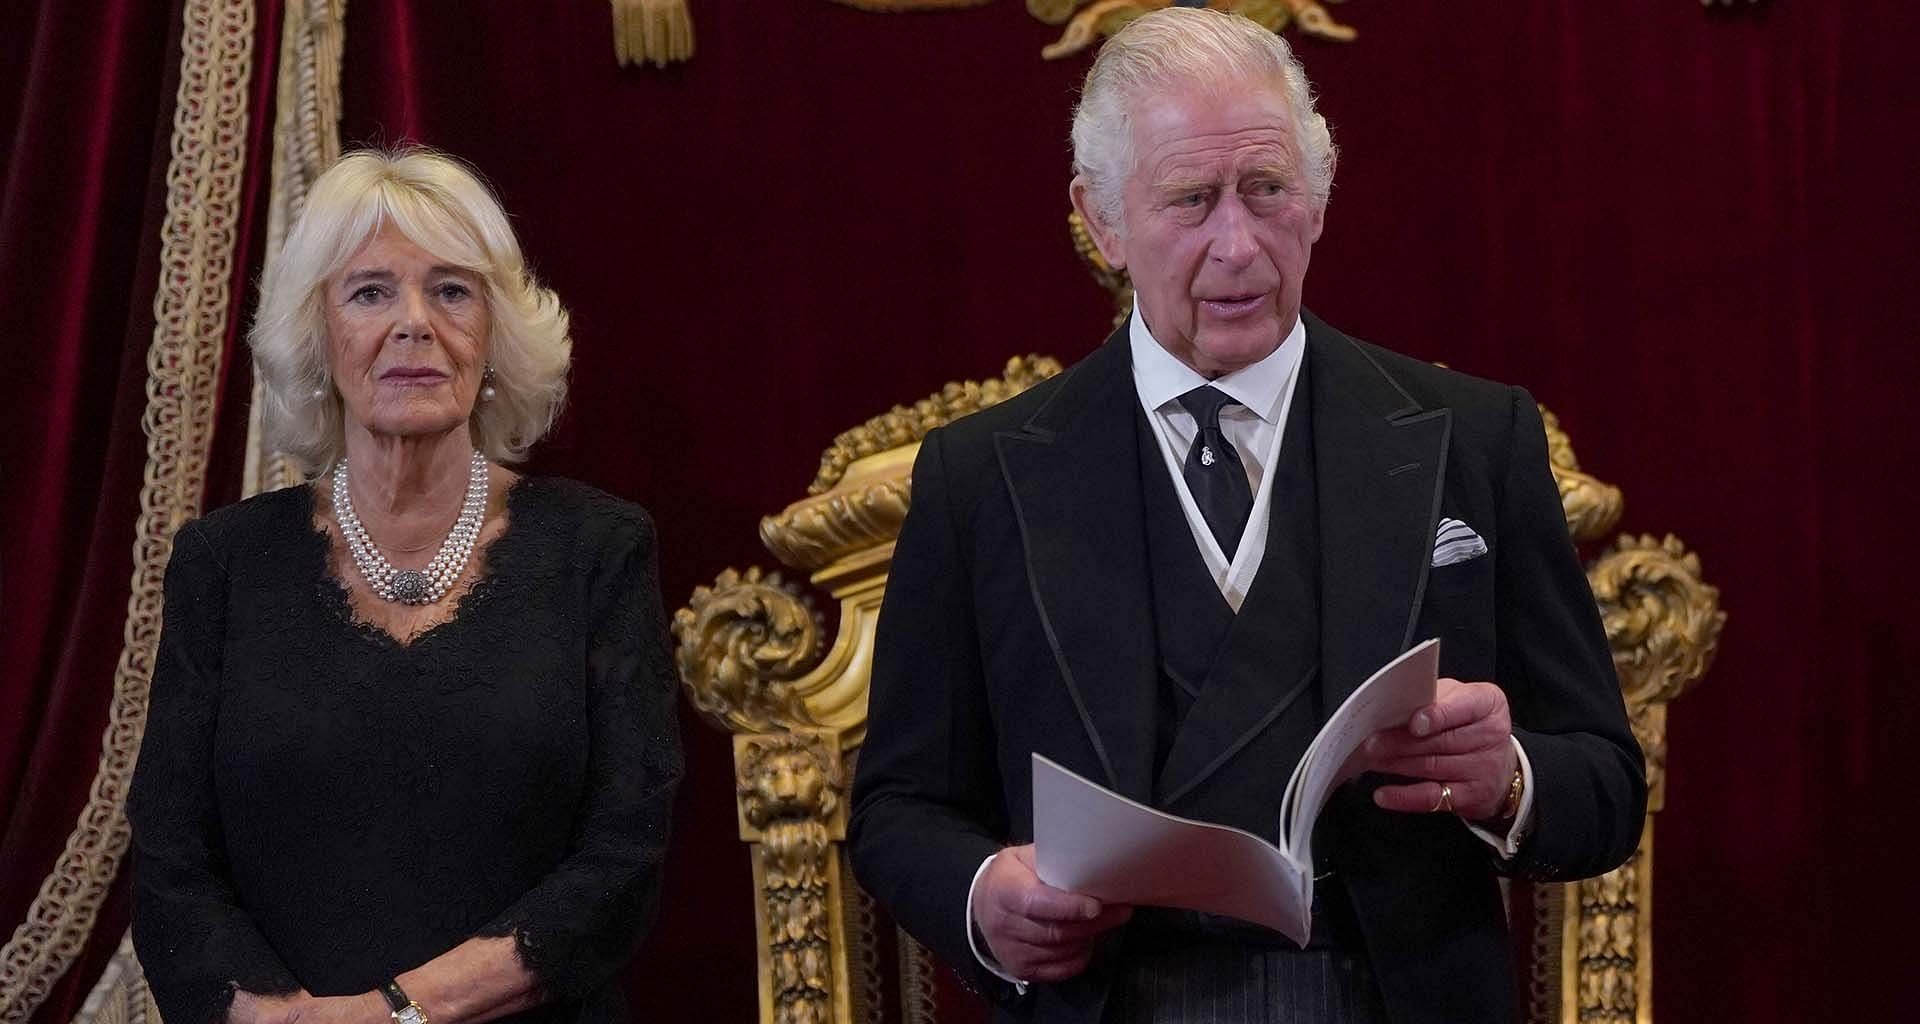 King Charles III and Camilla Parker Bowles has been married for 17 years (Image via Getty Images/Victoria Jones)